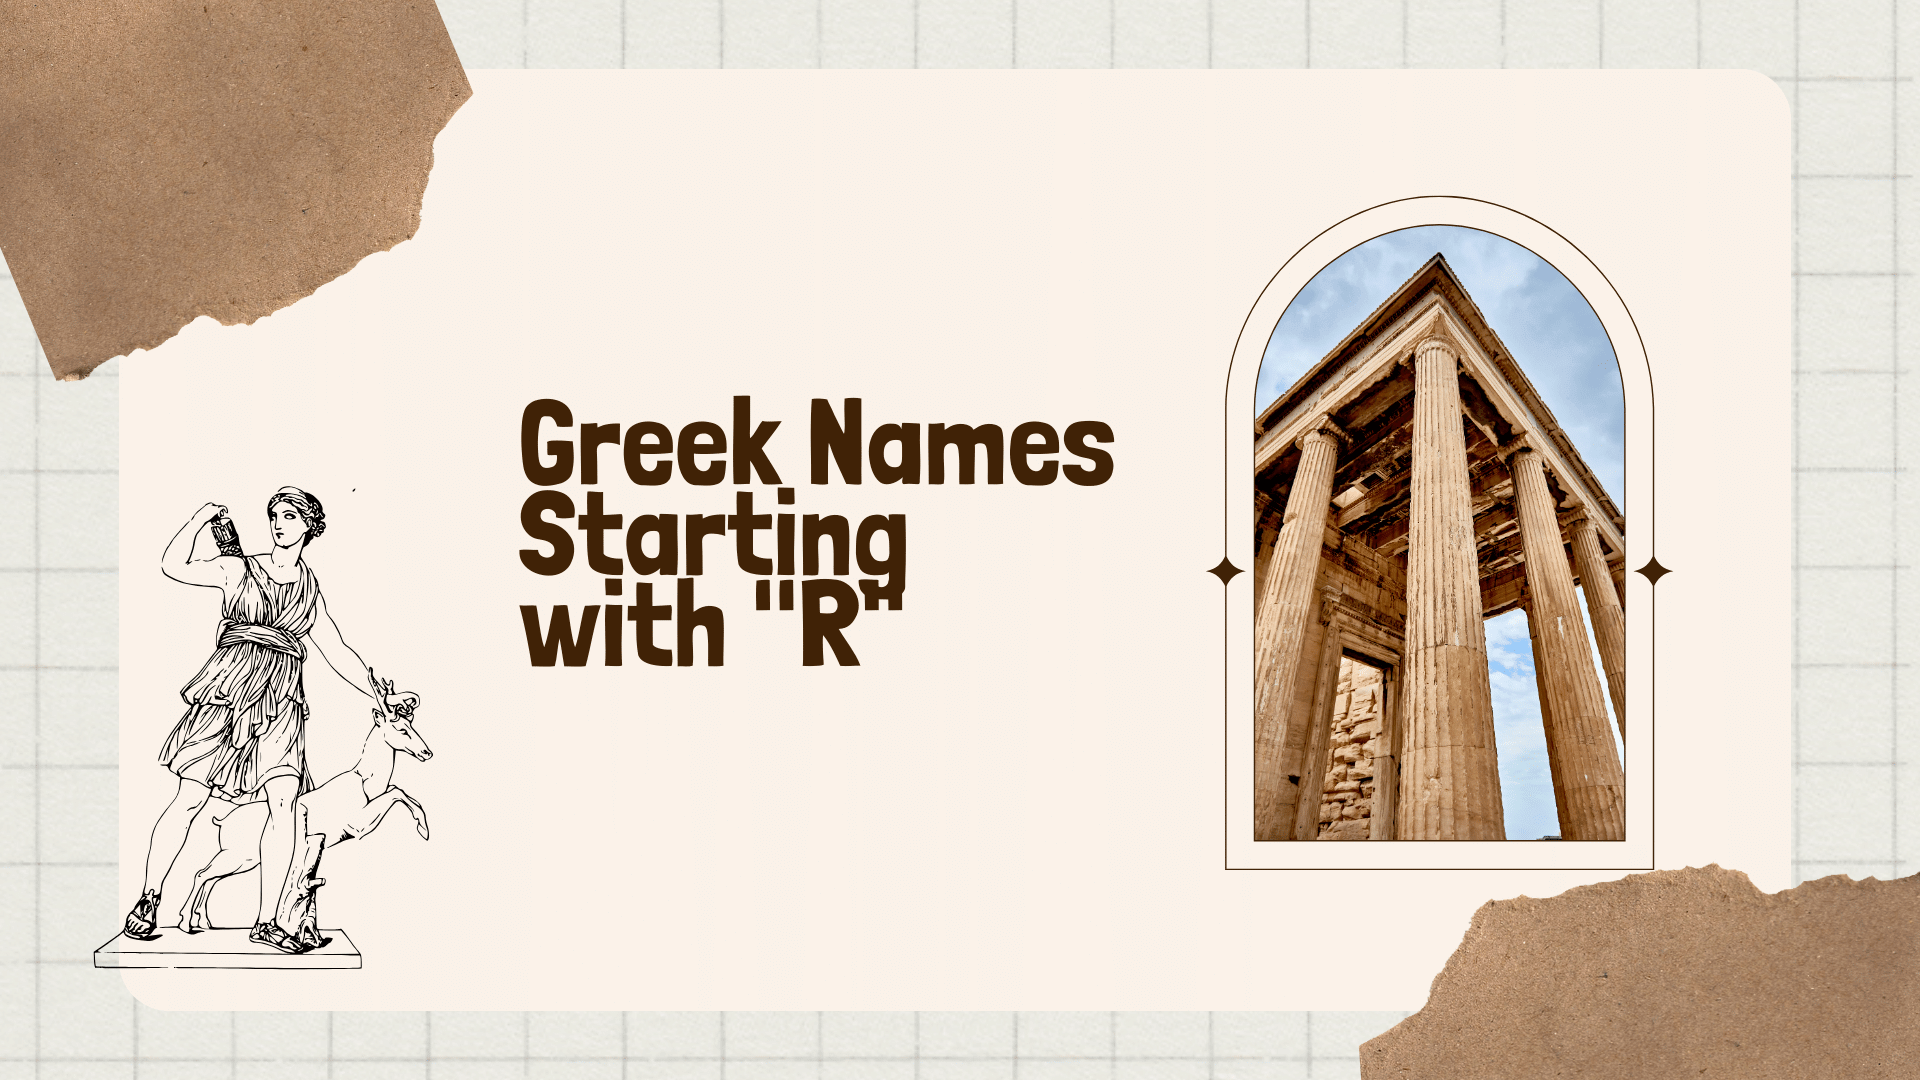 Greek Names Starting With "R"